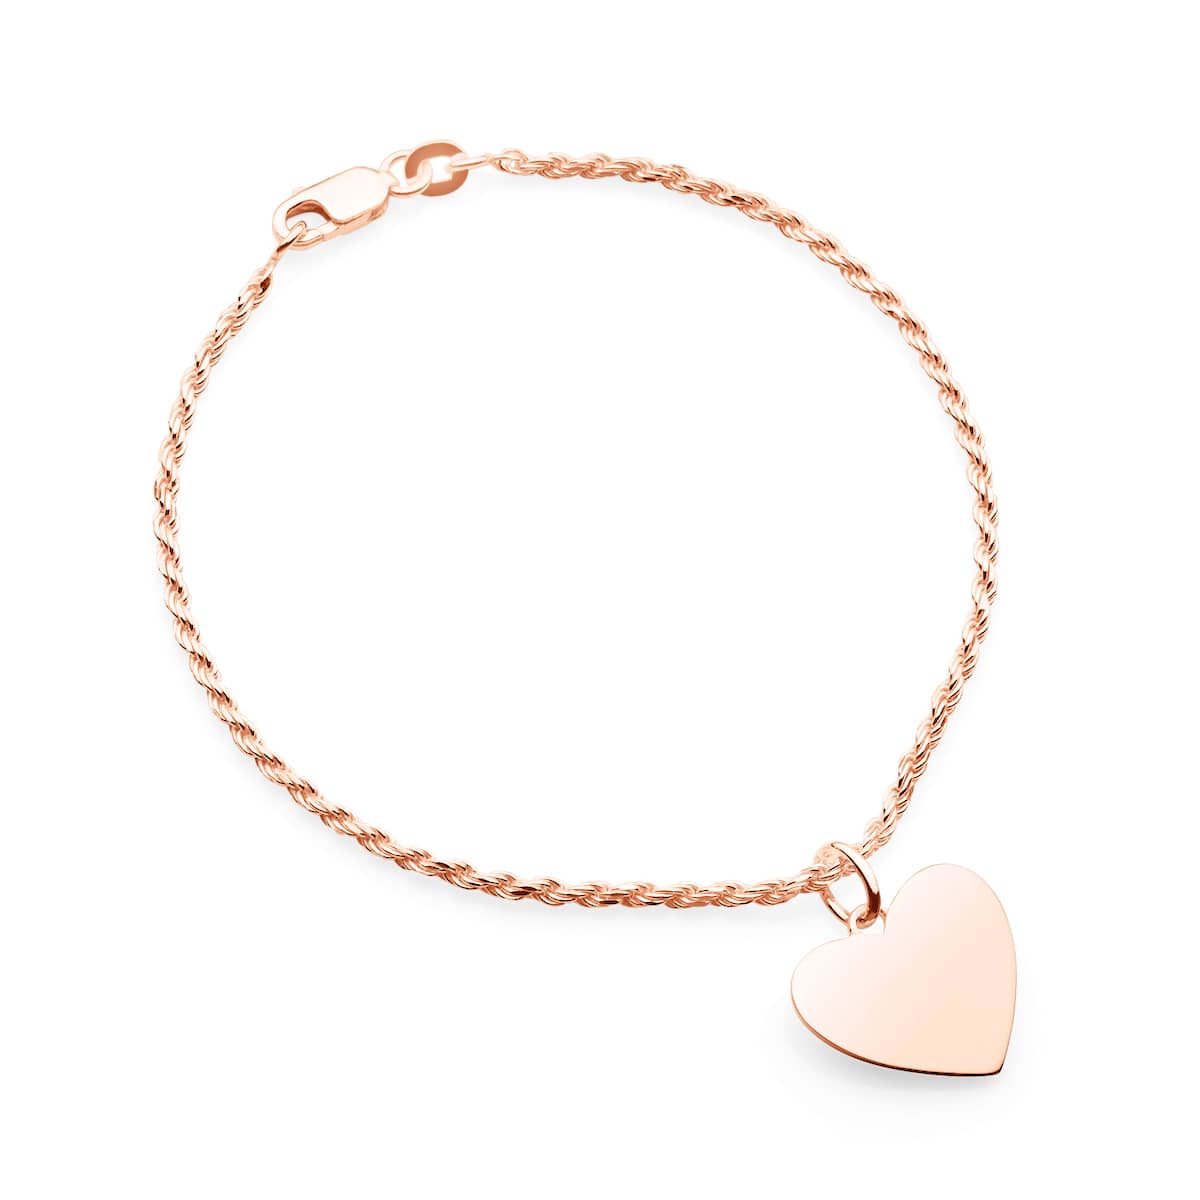 rose gold rope bracelet with heart pendant